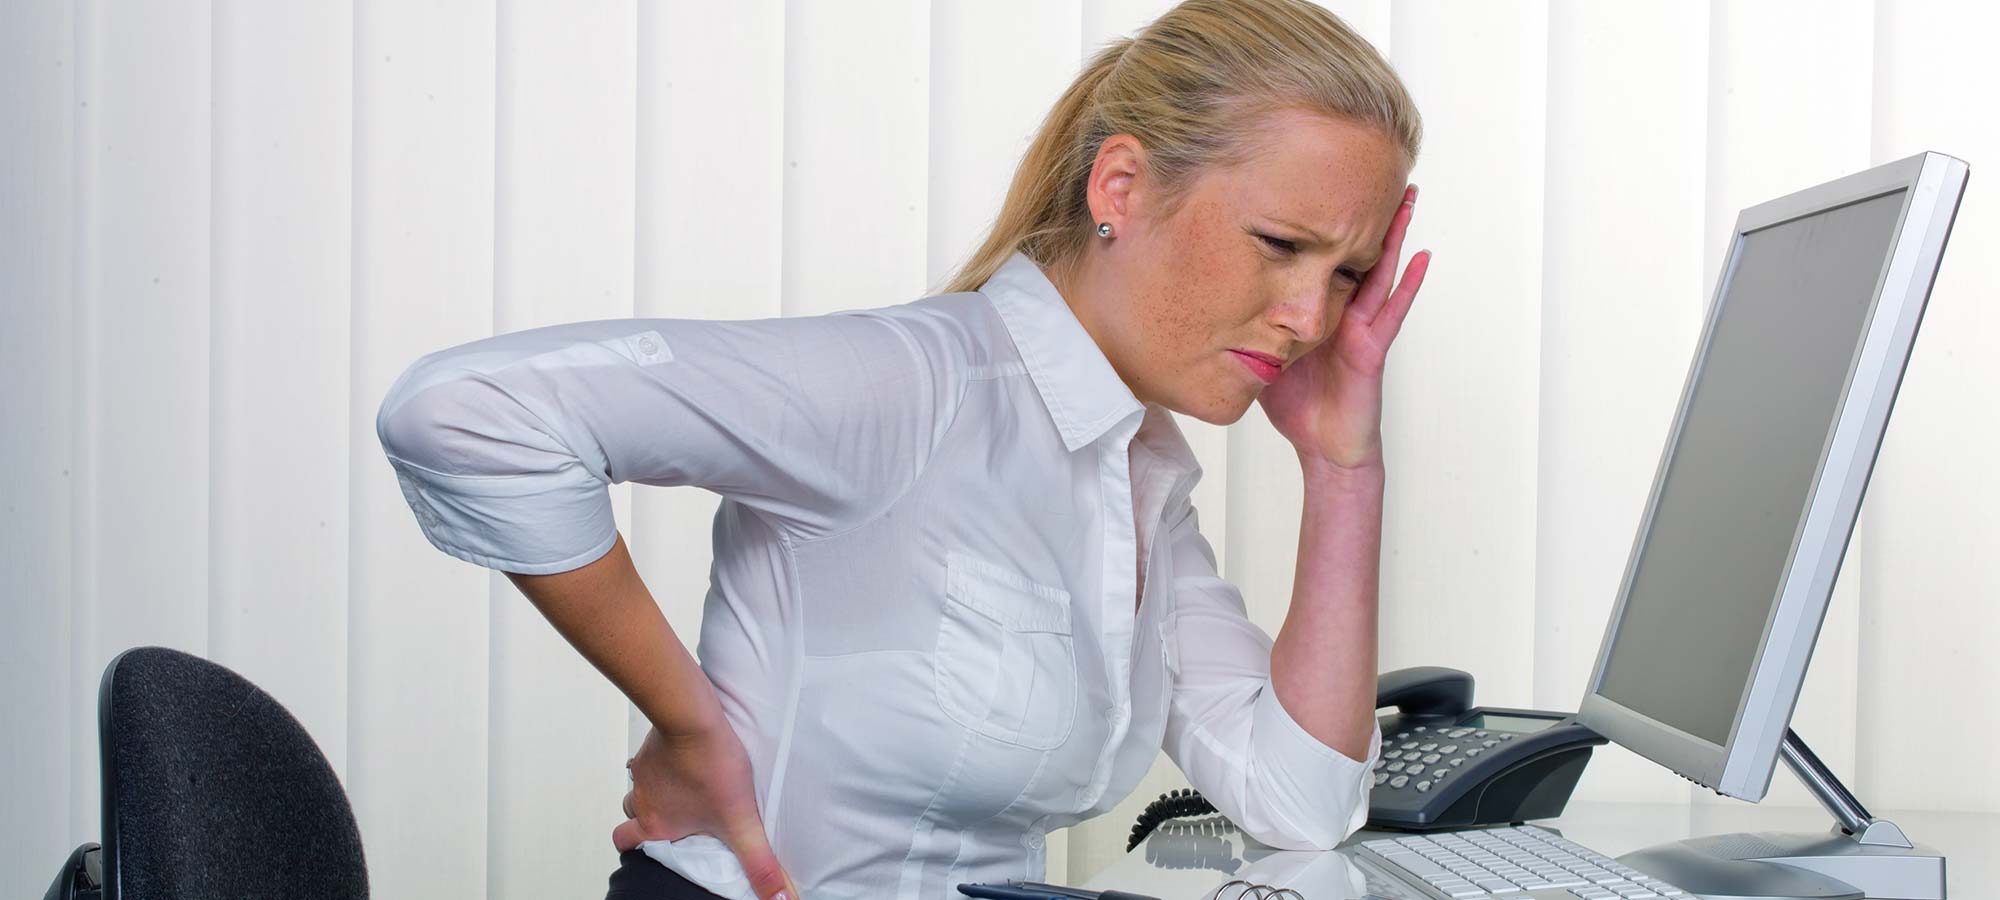 Office worker experiencing a headache, neck and back pain at a computer.